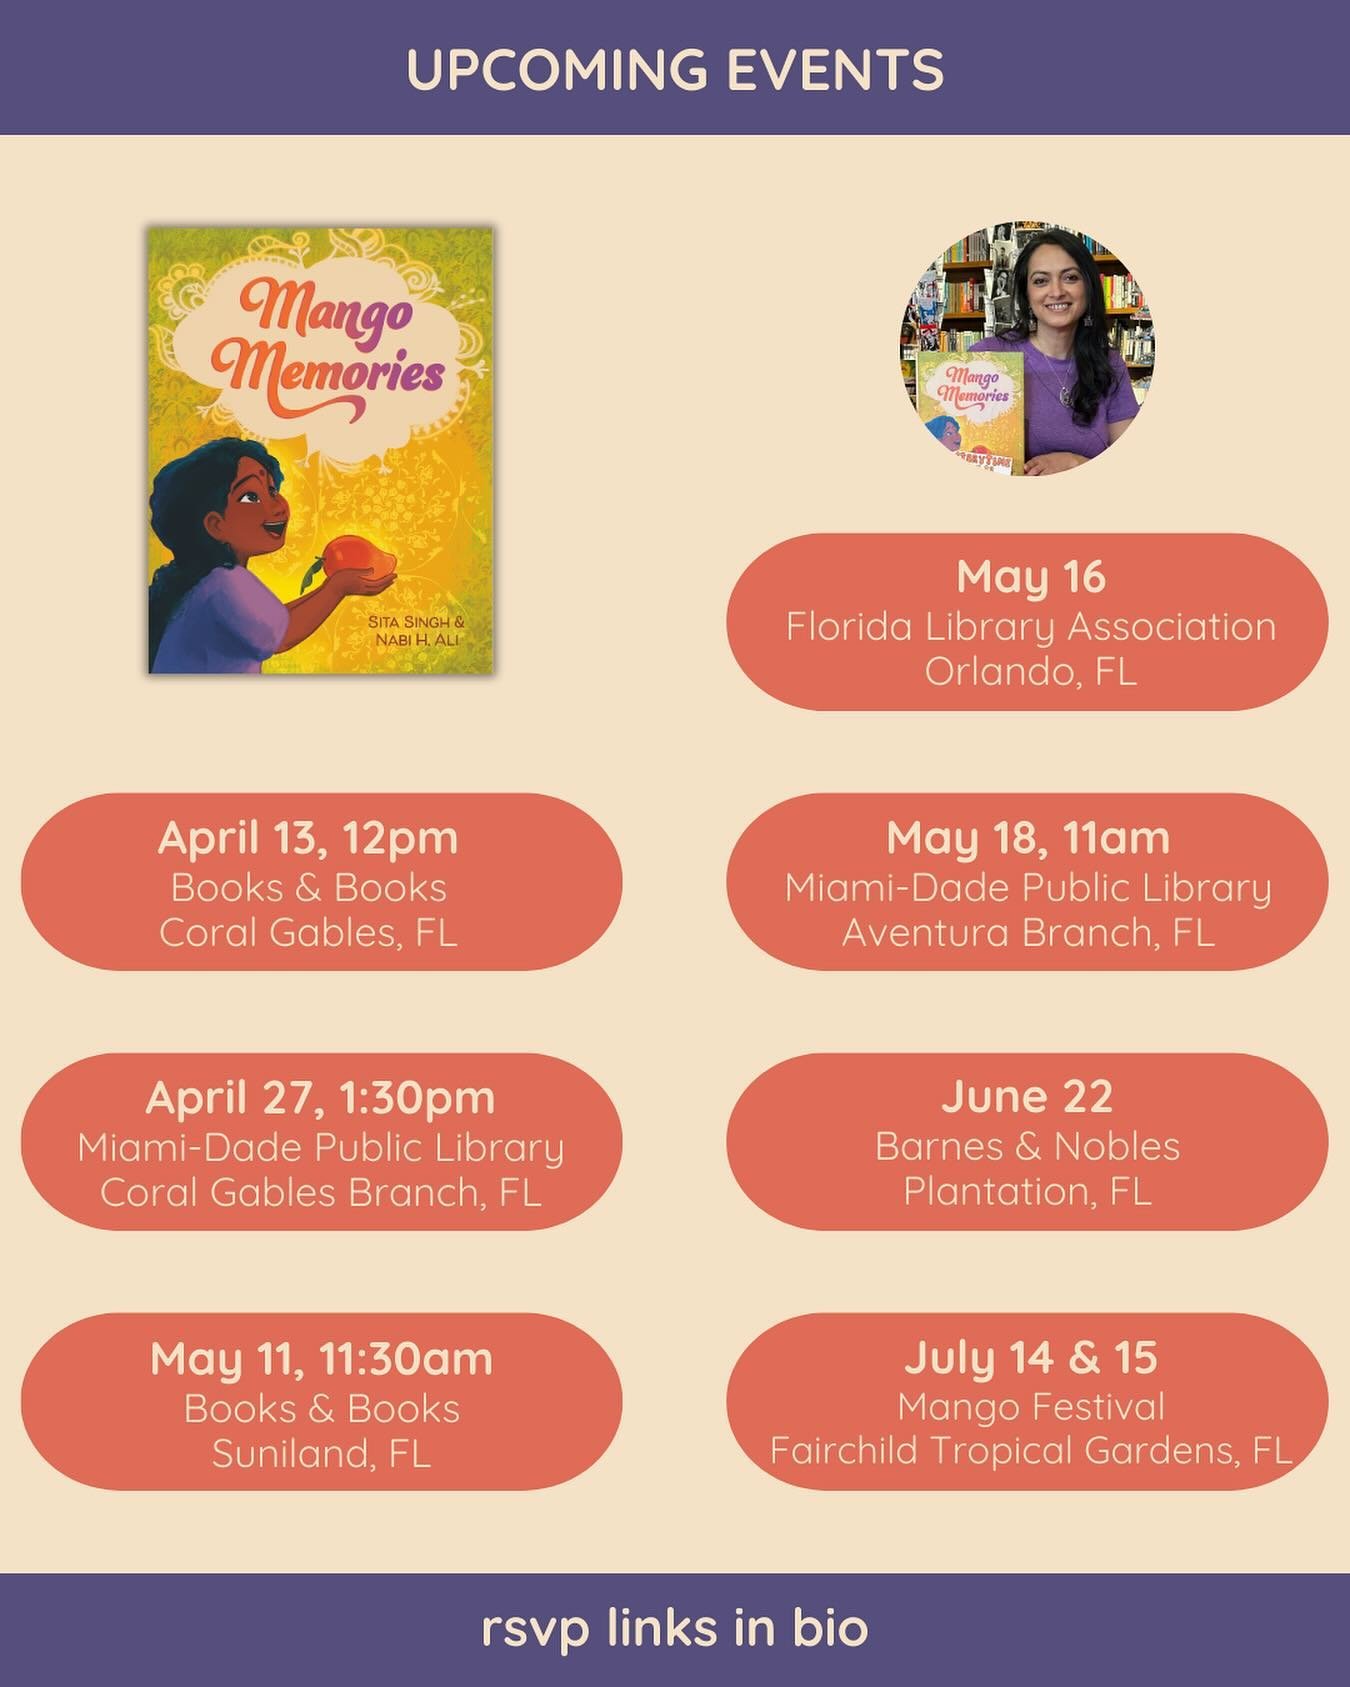 I am looking forward to sharing MANGO MEMORIES at several locations in South Florida over the next few months. I hope to see you at one of these events. 

@nabihaiderali @anneschwartzbooks  @randomhousekids @annedinah2222 @lookingglasslit @pictureboo